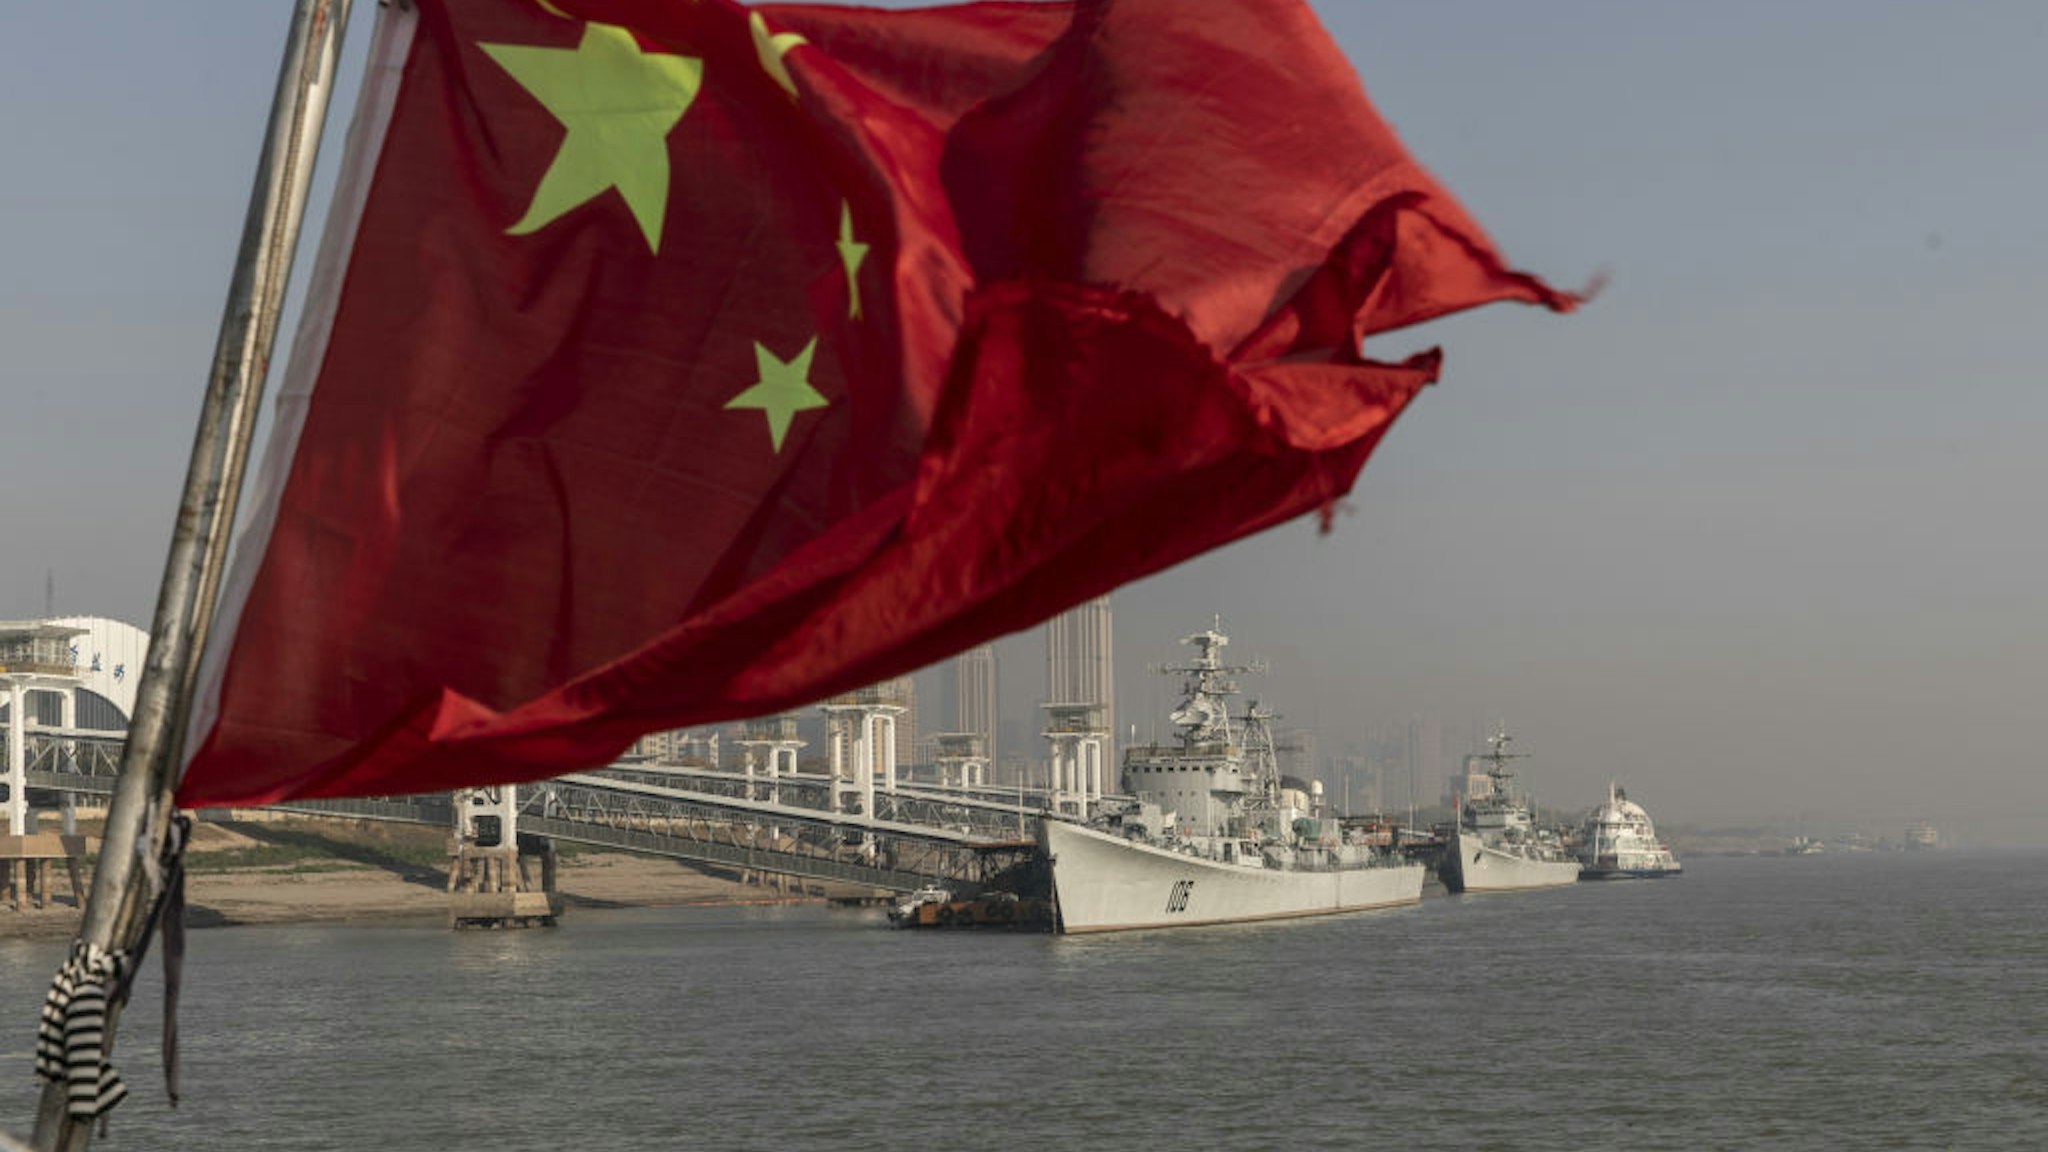 A Chinese national flag flies from a ferry as the retired People's Liberation Army (PLA) Navy Xian frigate ship, from left, and the Huaian frigate ship sit anchored on the Yangtze River in Wuhan, Hubei, China, on Wednesday, Dec. 11, 2019. China's economic growth will come in at 5.9% in 2020 as easing trade tensions and the prospect of lower bank borrowing costs boost confidence, according to analysts and traders.